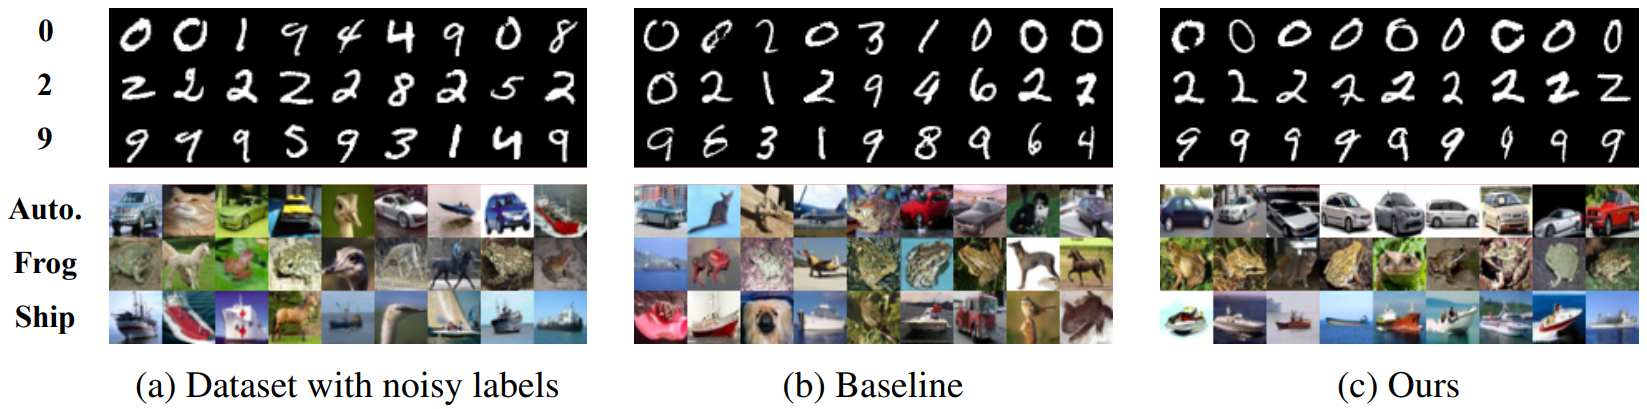 (a) Examples of noisy labeled datasets of MNIST (top) and CIFAR-10 (bottom), and (b-c) the randomly generated images of baseline and our models, trained with the noisy labeled datasets.